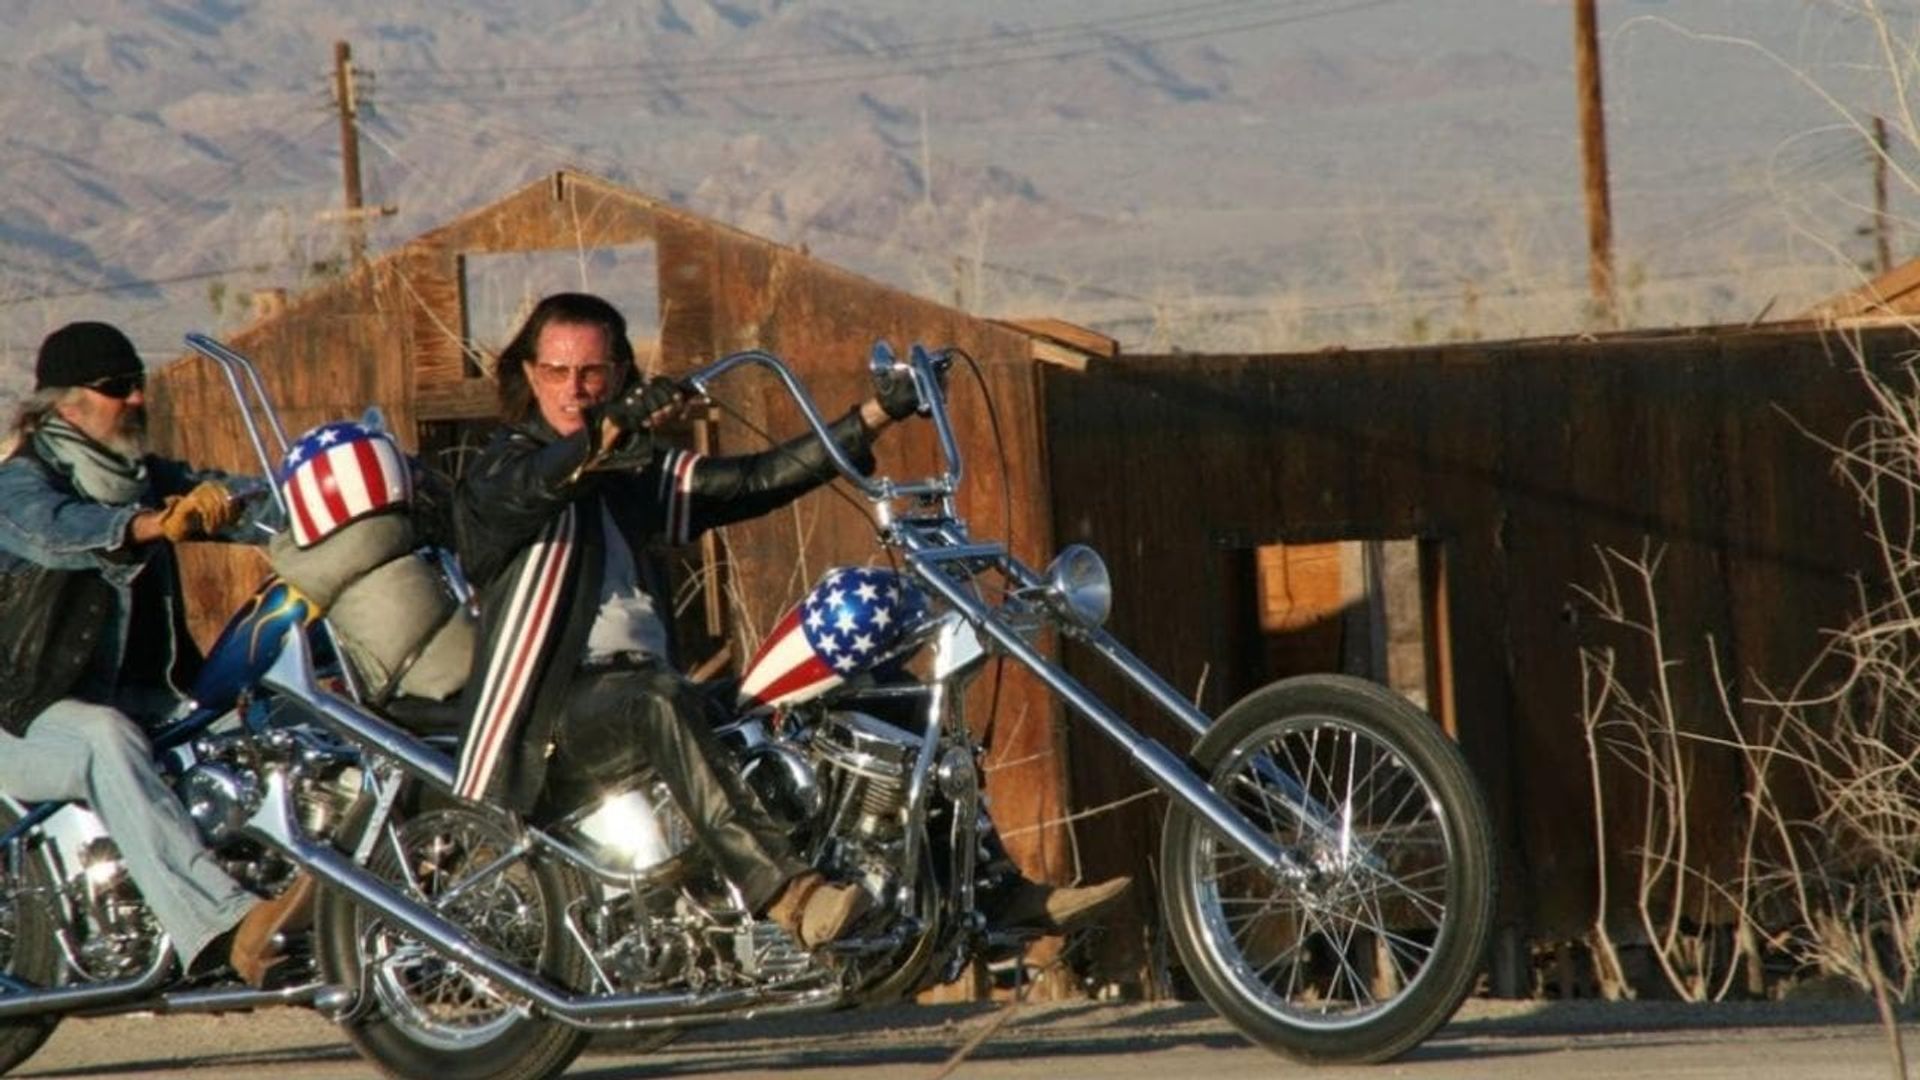 Easy Rider 2: The Ride Home background